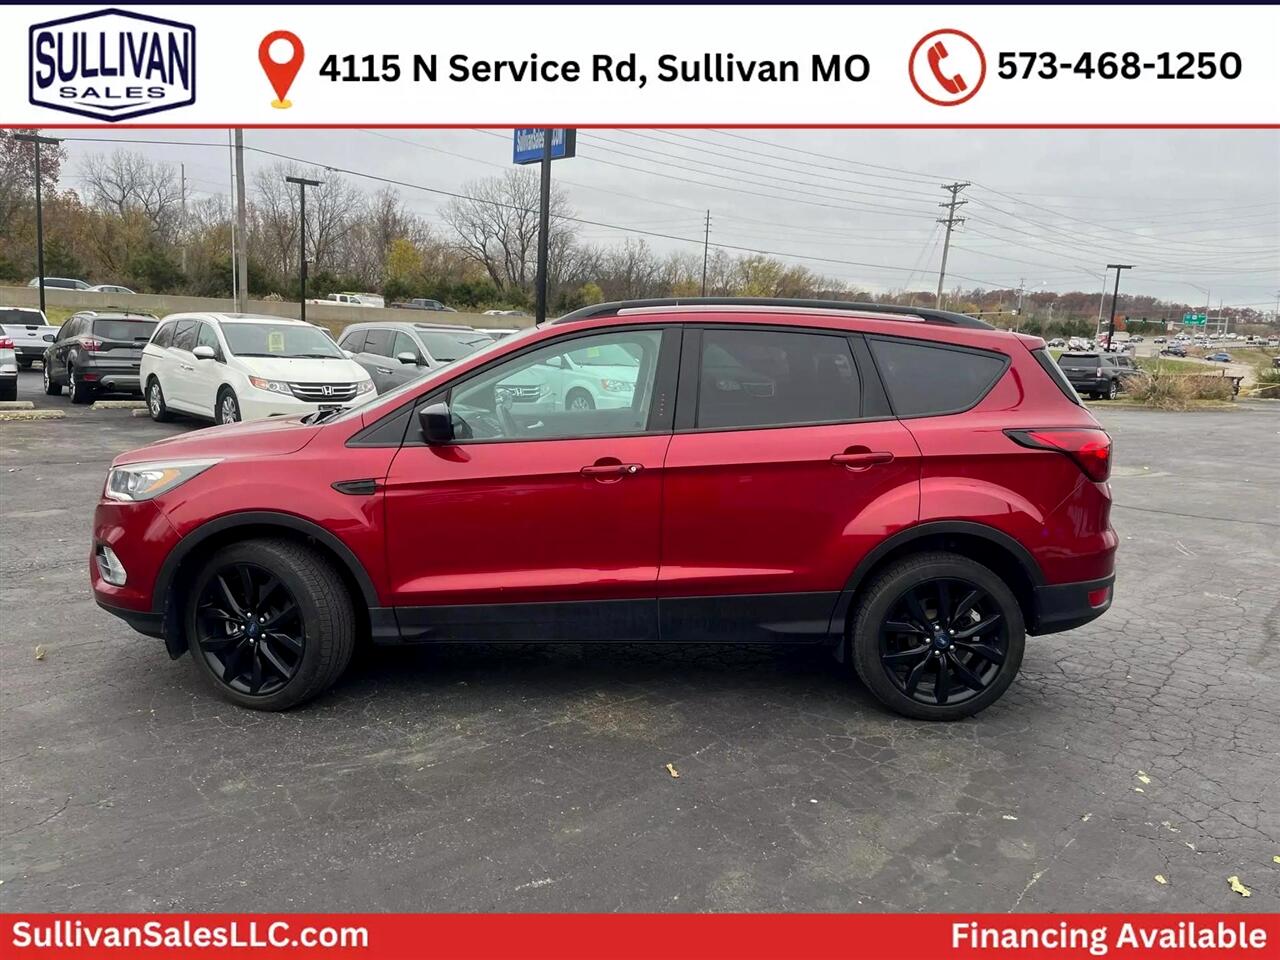 Used 2019 Ford Escape SE with VIN 1FMCU9GD5KUA25773 for sale in Sullivan, MO